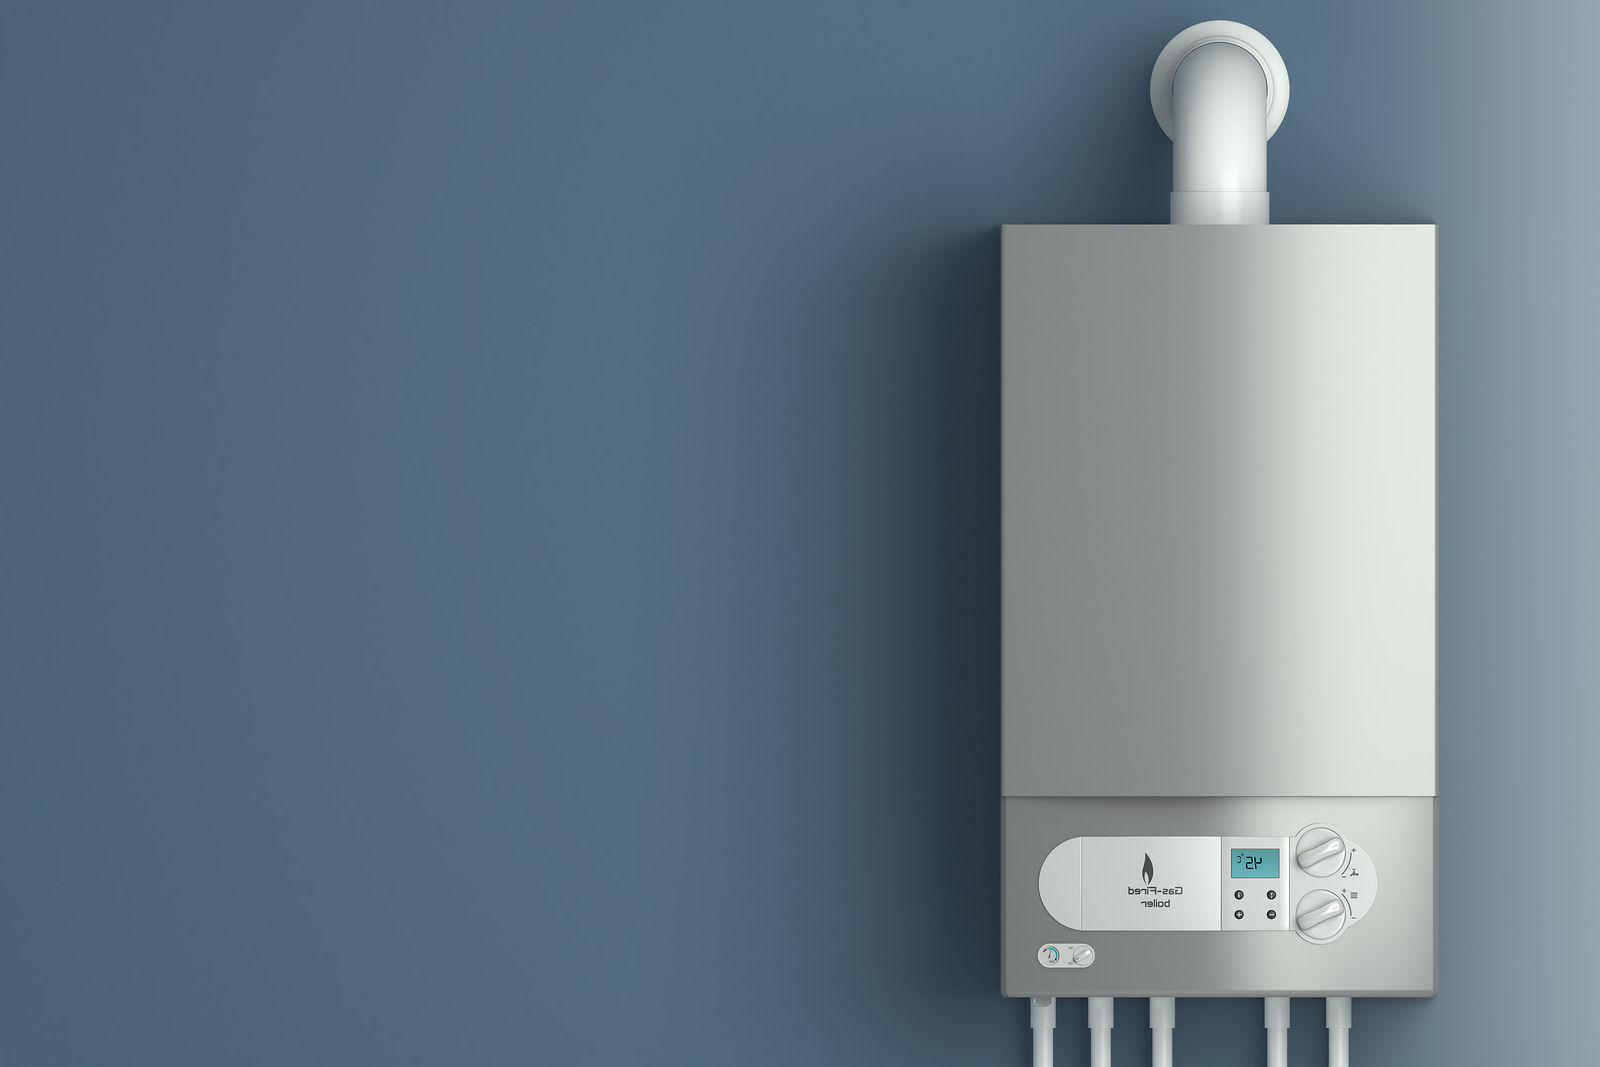 Things to Consider Before Choosing Your New Boiler